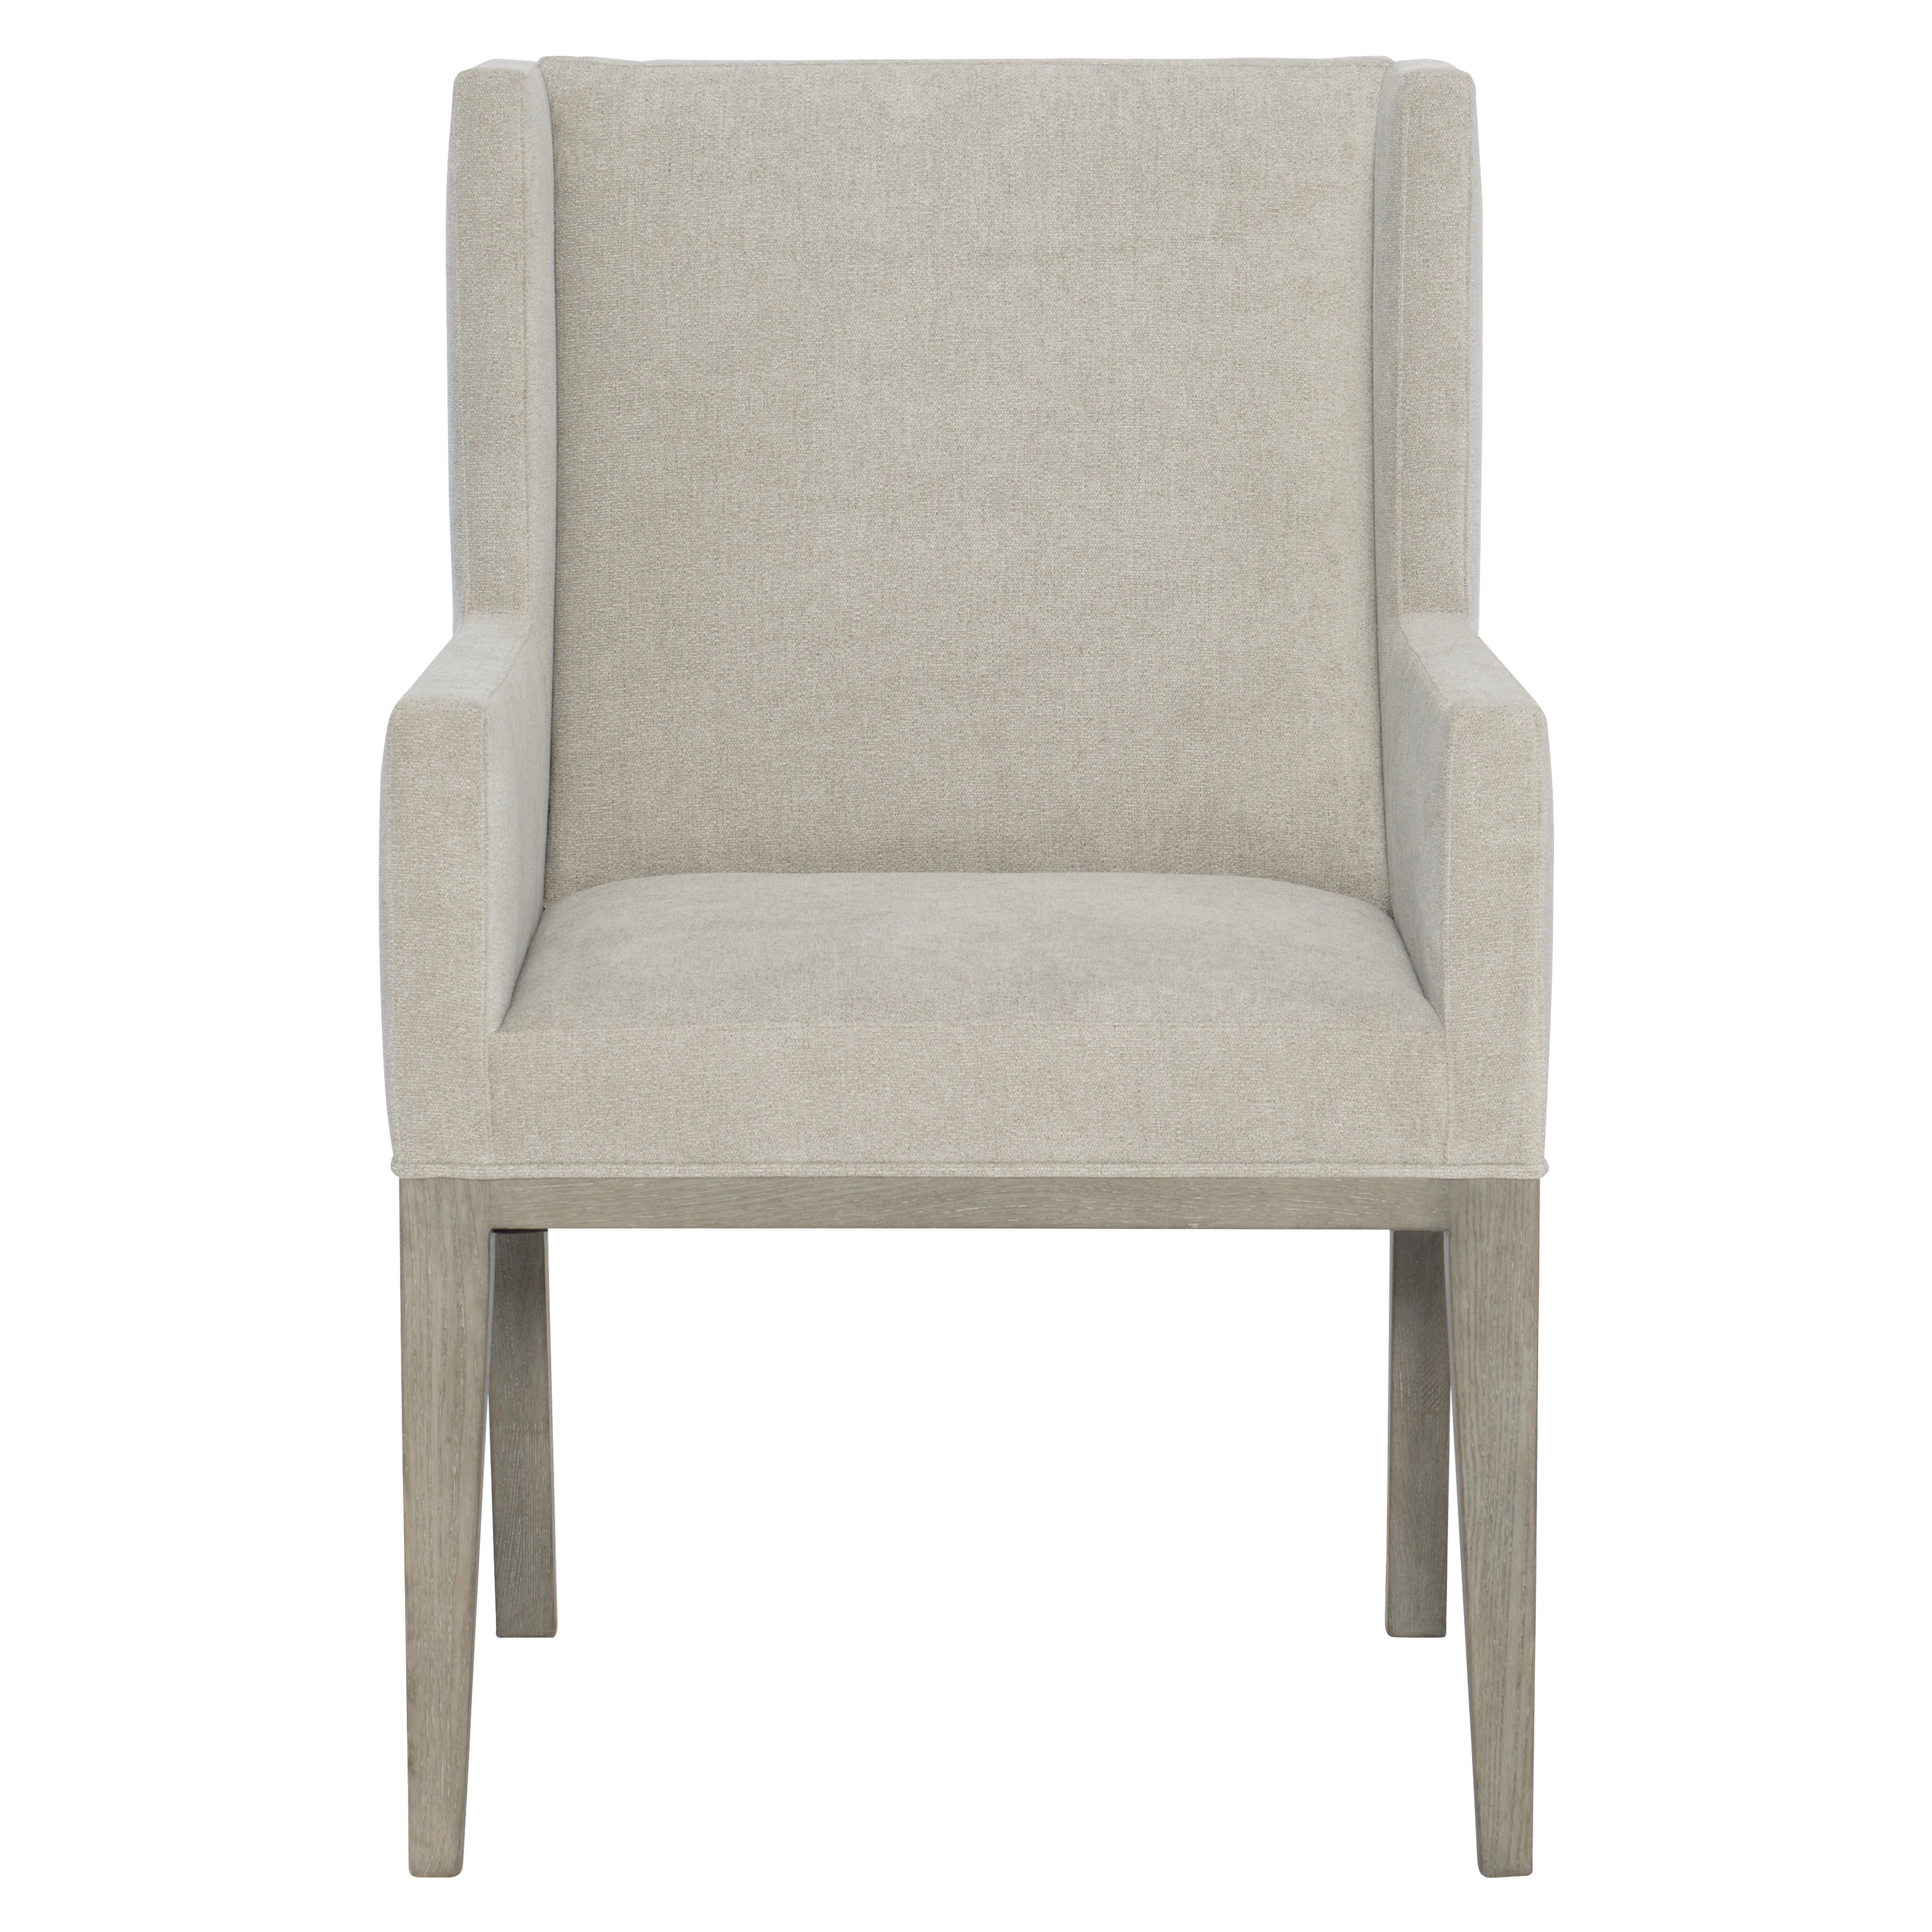 Linea Upholstered Arm Chair in Cerused Greige Finish